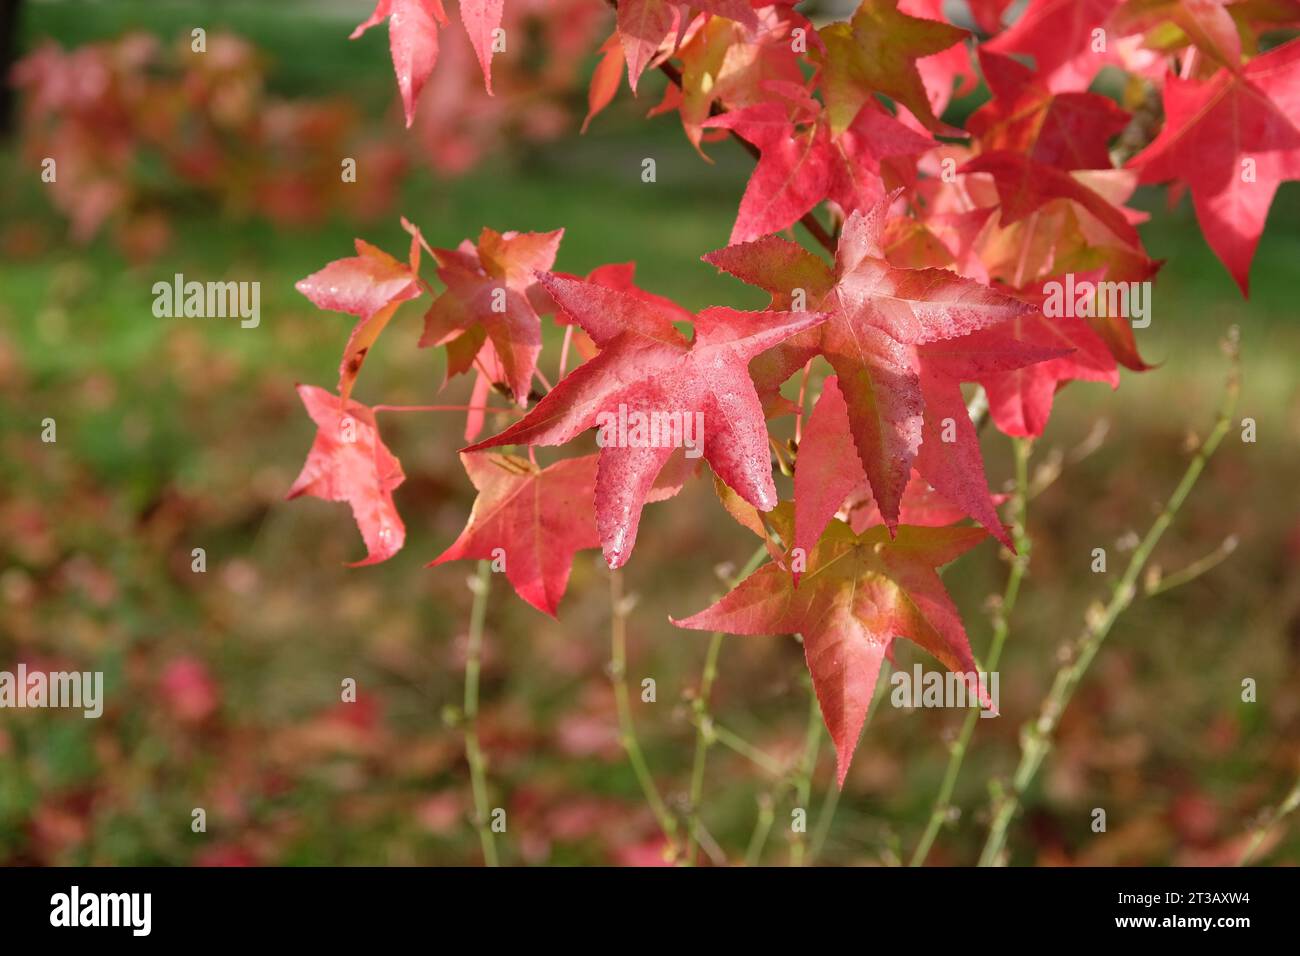 The red and orange leaves of the Liquidambar styraciflua 'Lane RobertsÕ, also known as a Sweetgum, liquid amber, or American Amber, during the autumn. Stock Photo